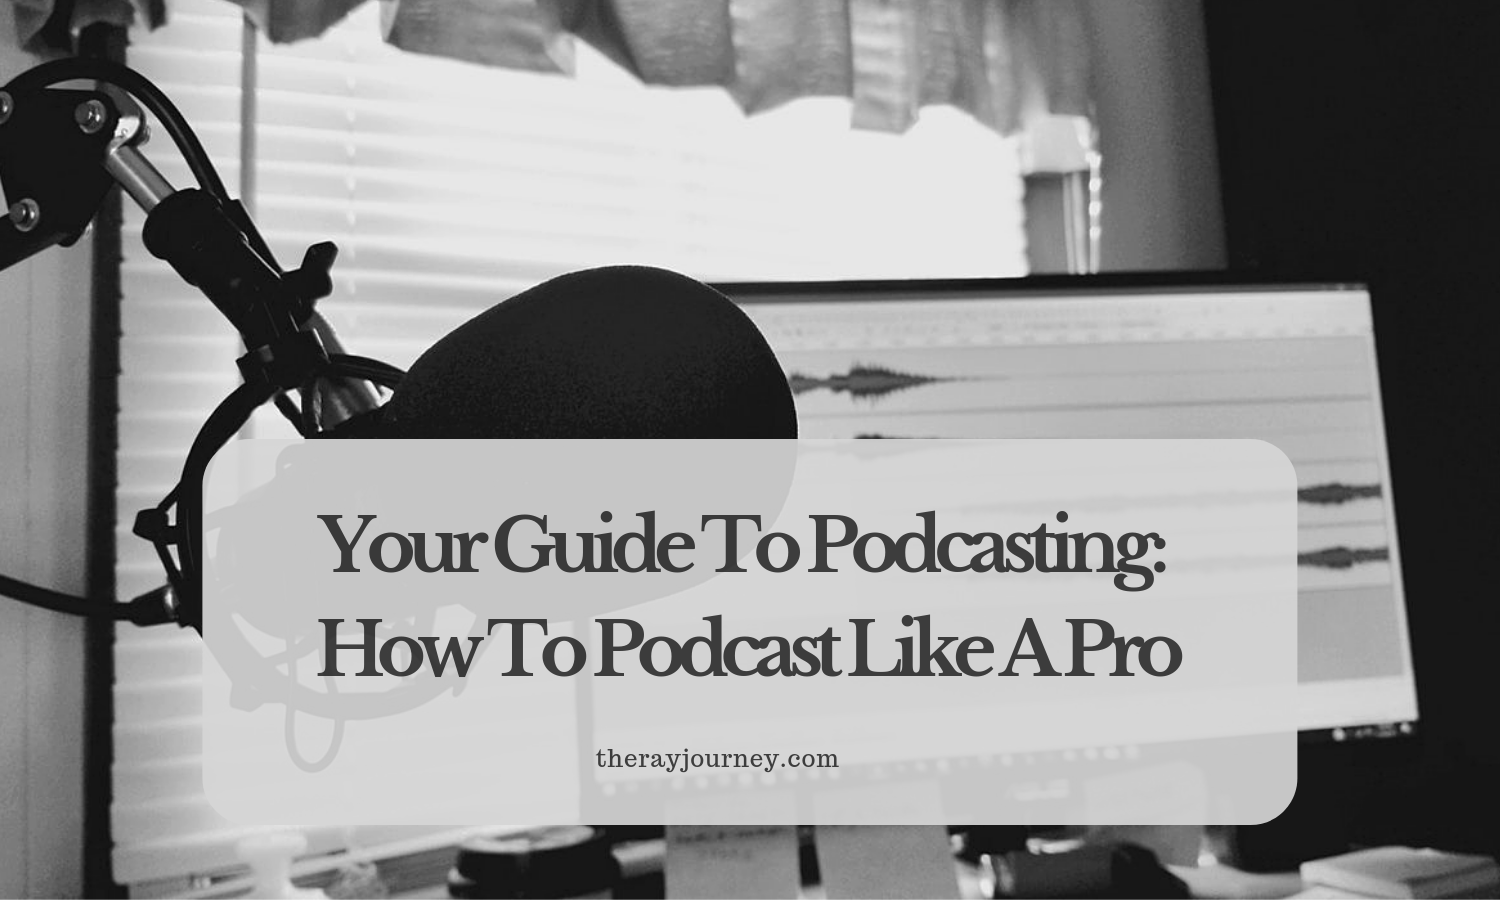 your guide to podcasting; how to podcast like a pro. photo taken by tommy lopez.